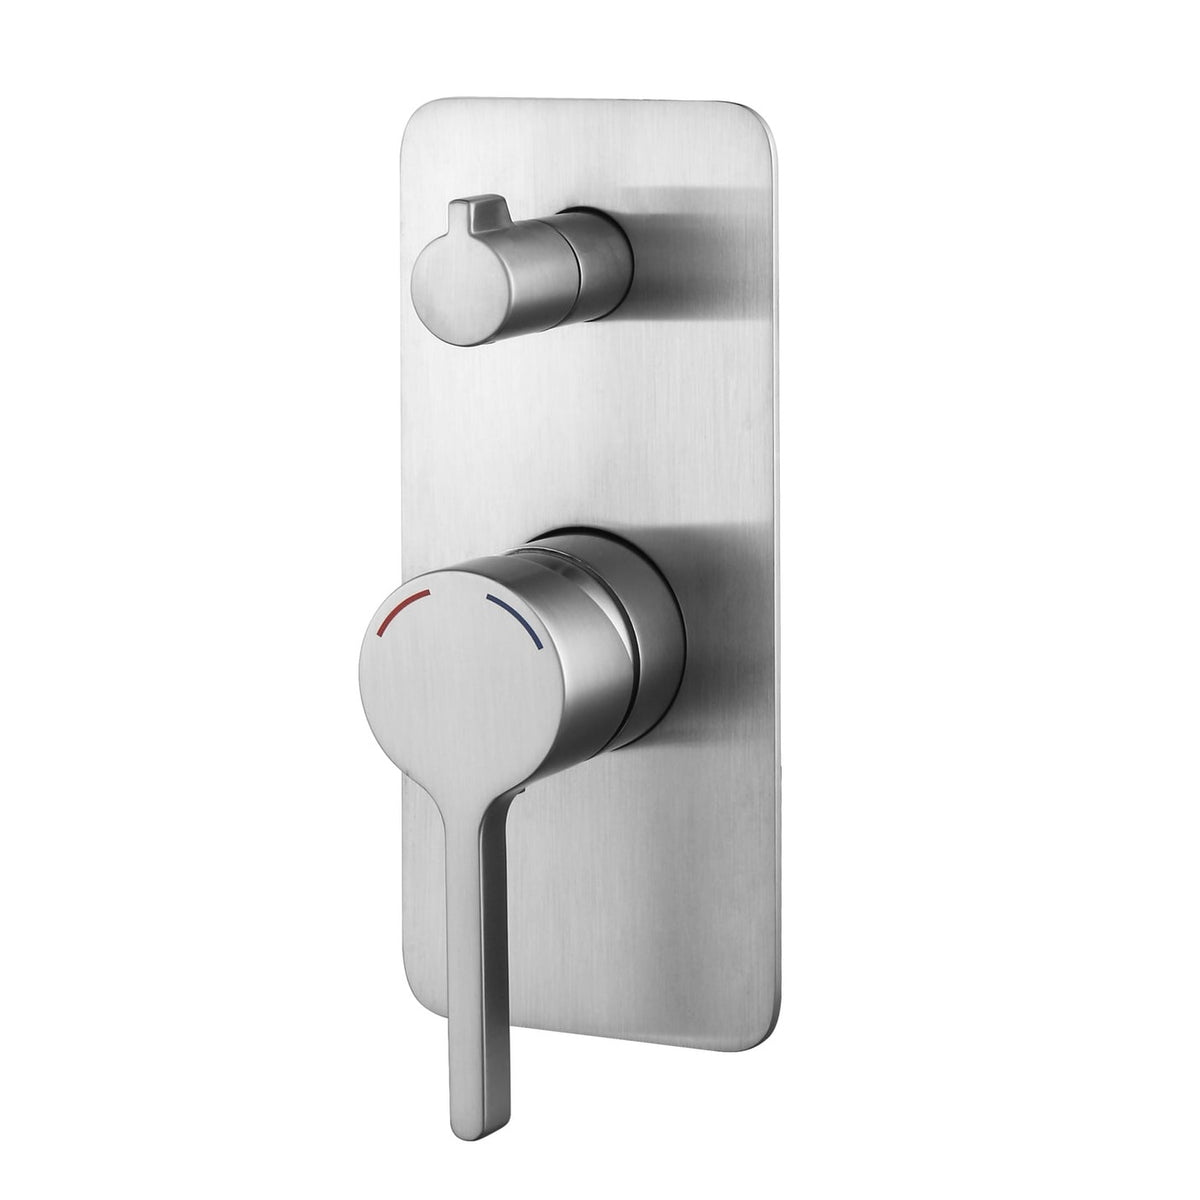 Kenzo Shower and Bath mixer with Diverter Brushed Nickel WT6509BN